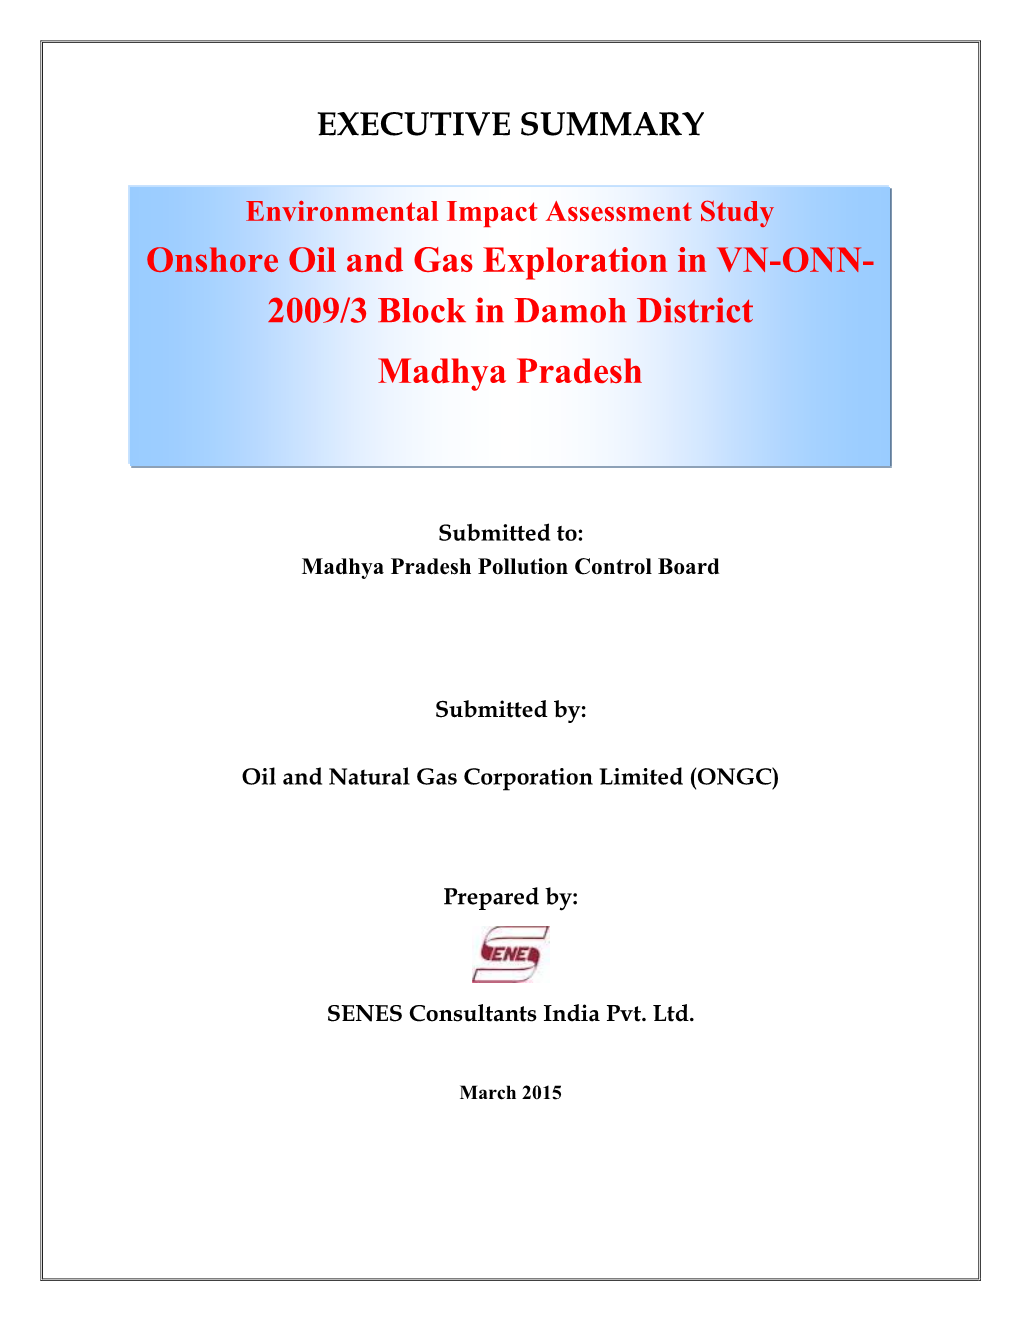 Onshore Oil and Gas Exploration in VN-ONN- 2009/3 Block in Damoh District Madhya Pradesh